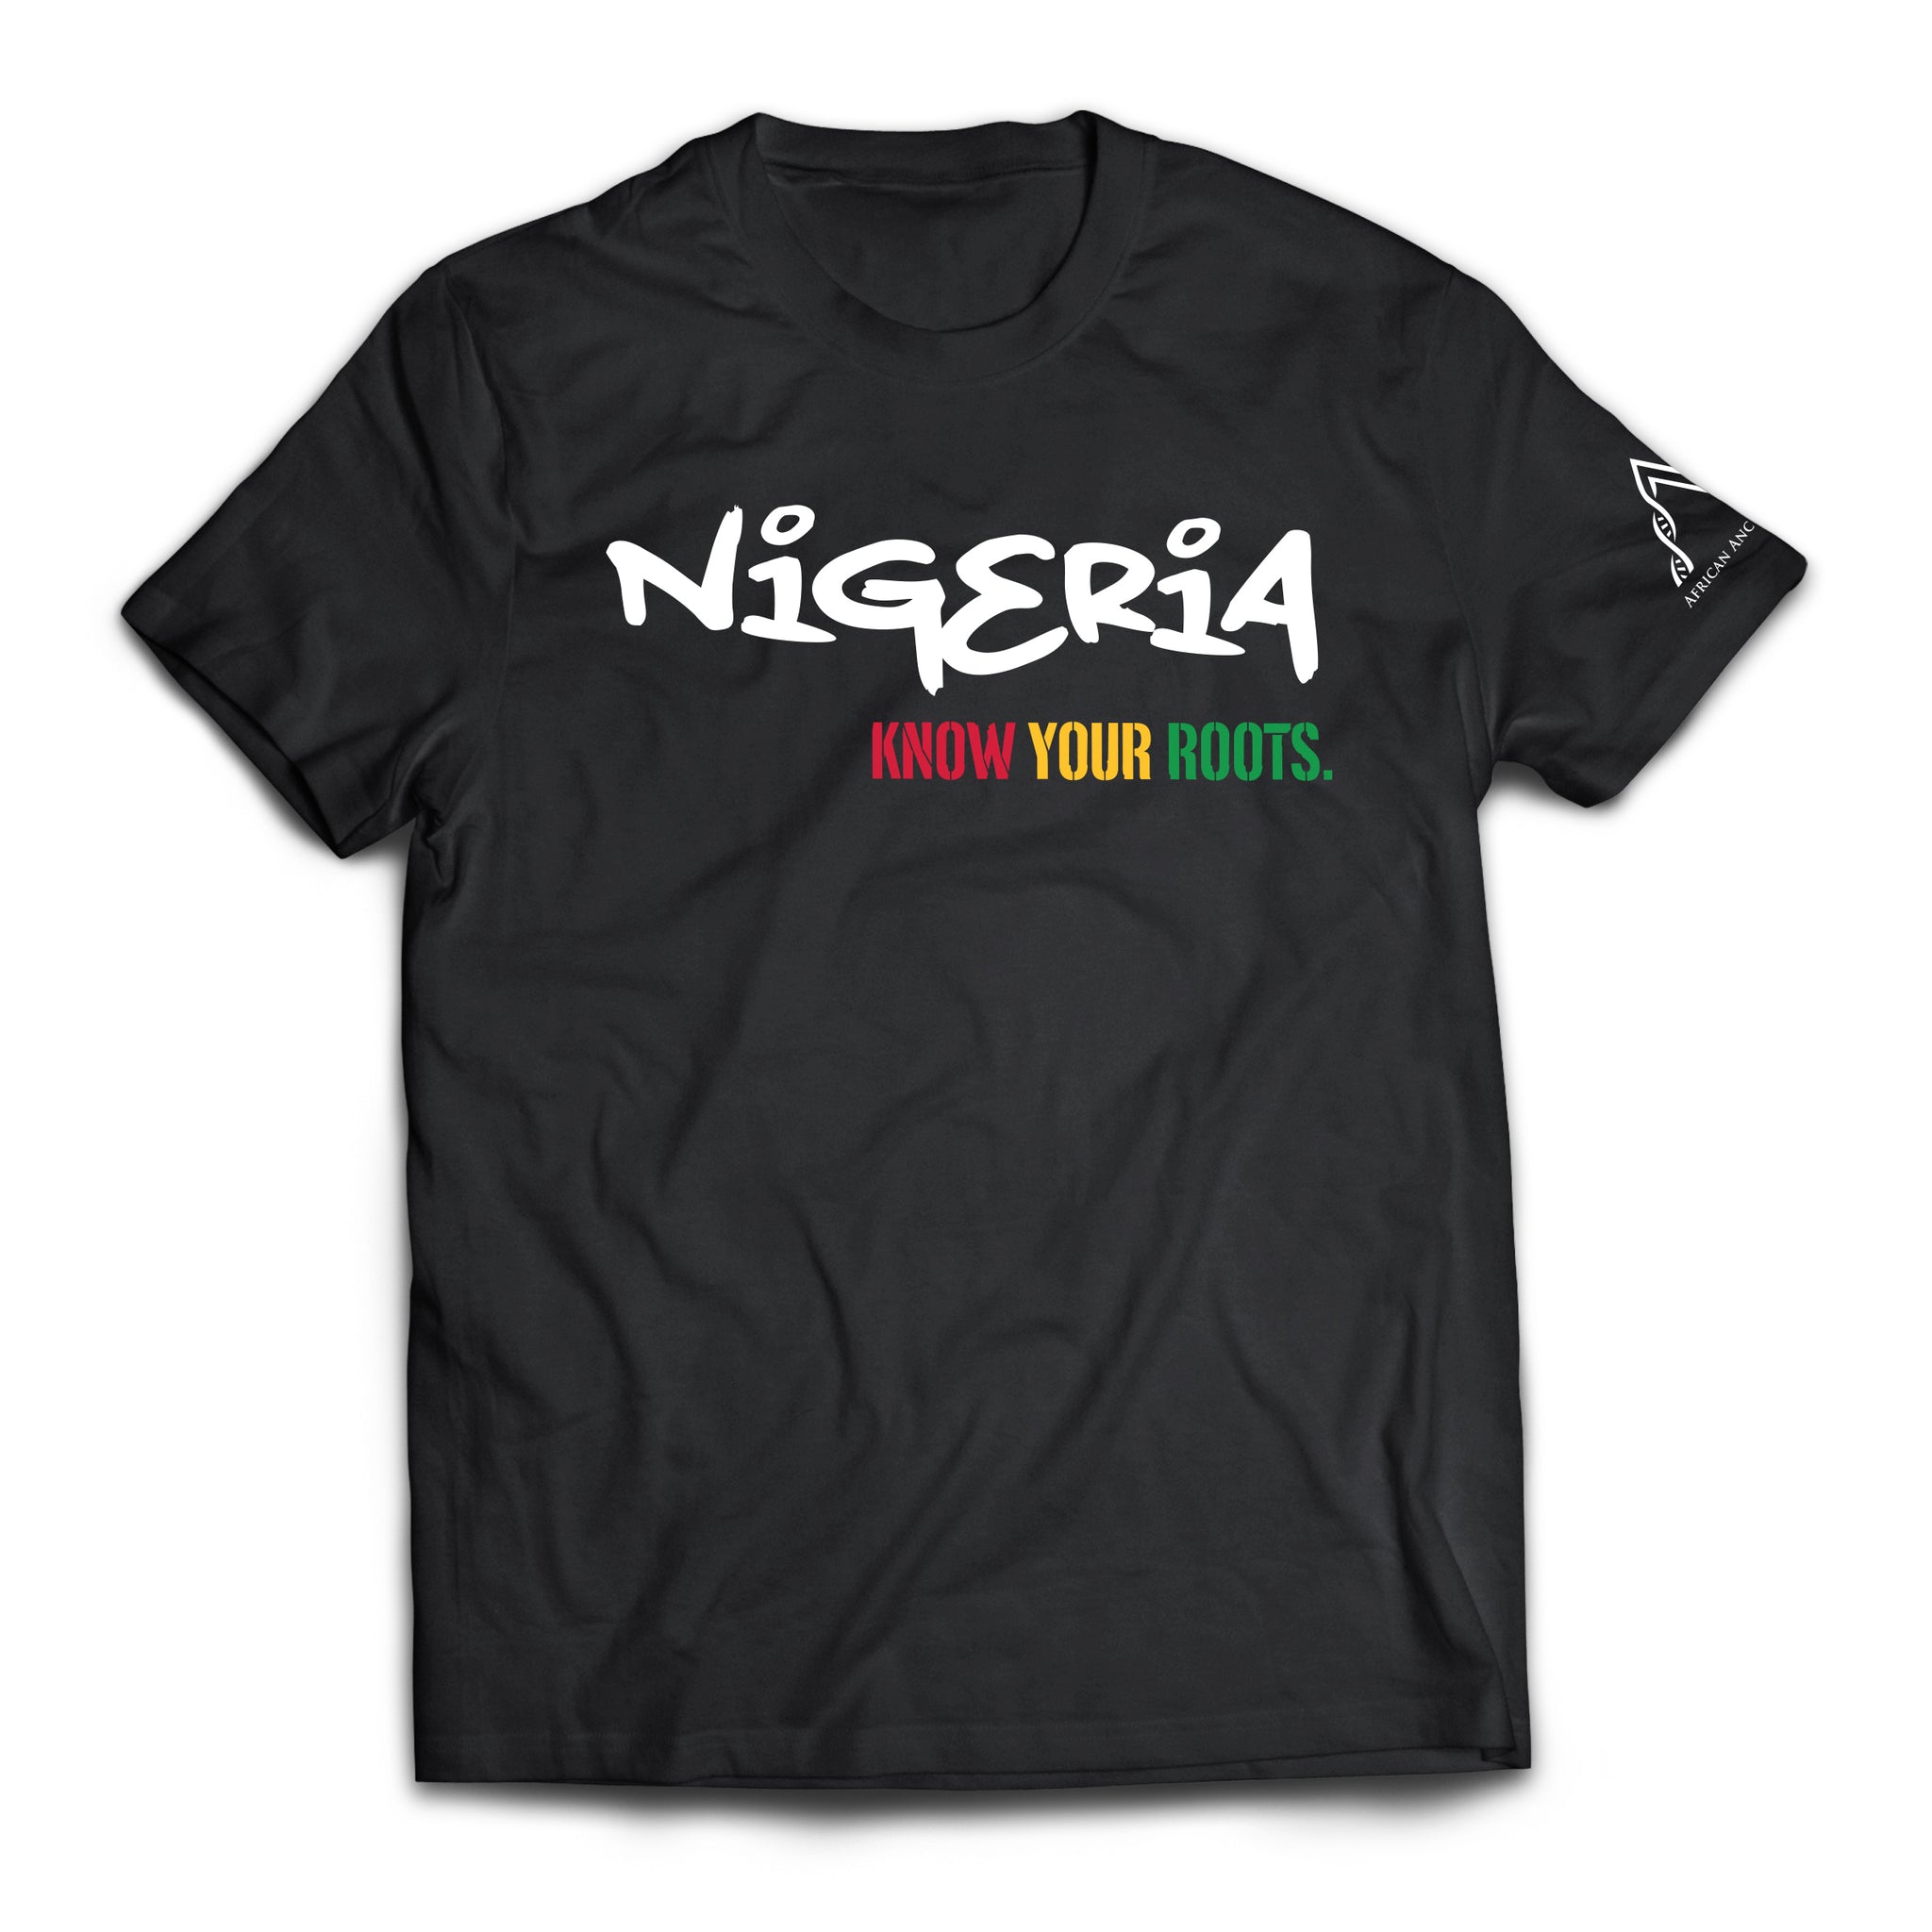 Nigeria T-Shirt with "Know your roots" in African colors